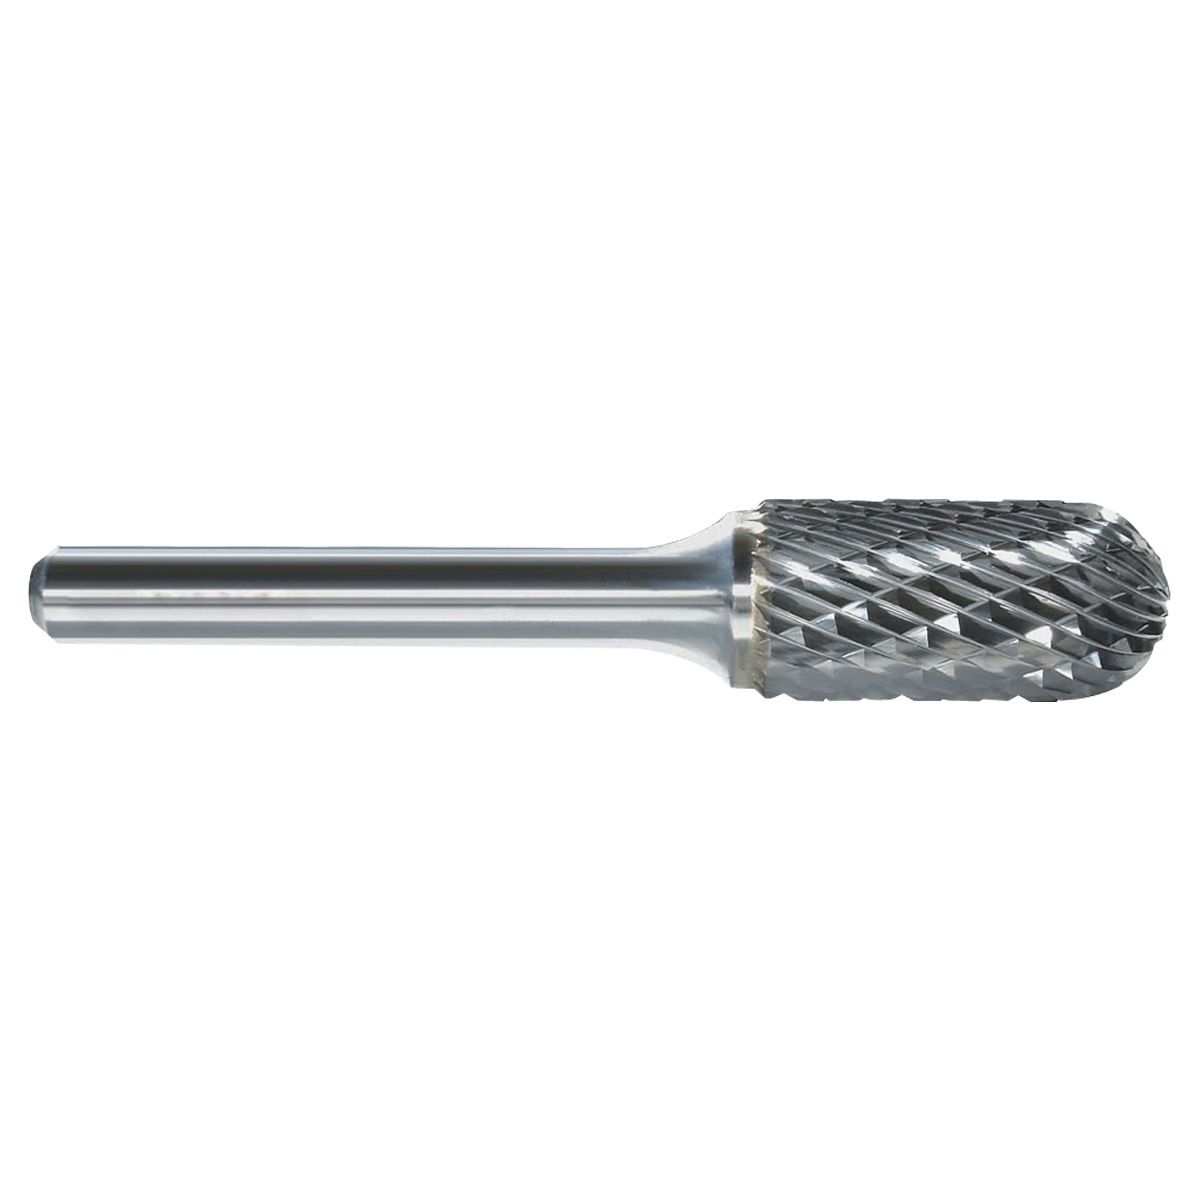 SC-5 CYLINDRICAL BALL NOSE DOUBLE-CUT CARBIDE BURRS (3000-0115)